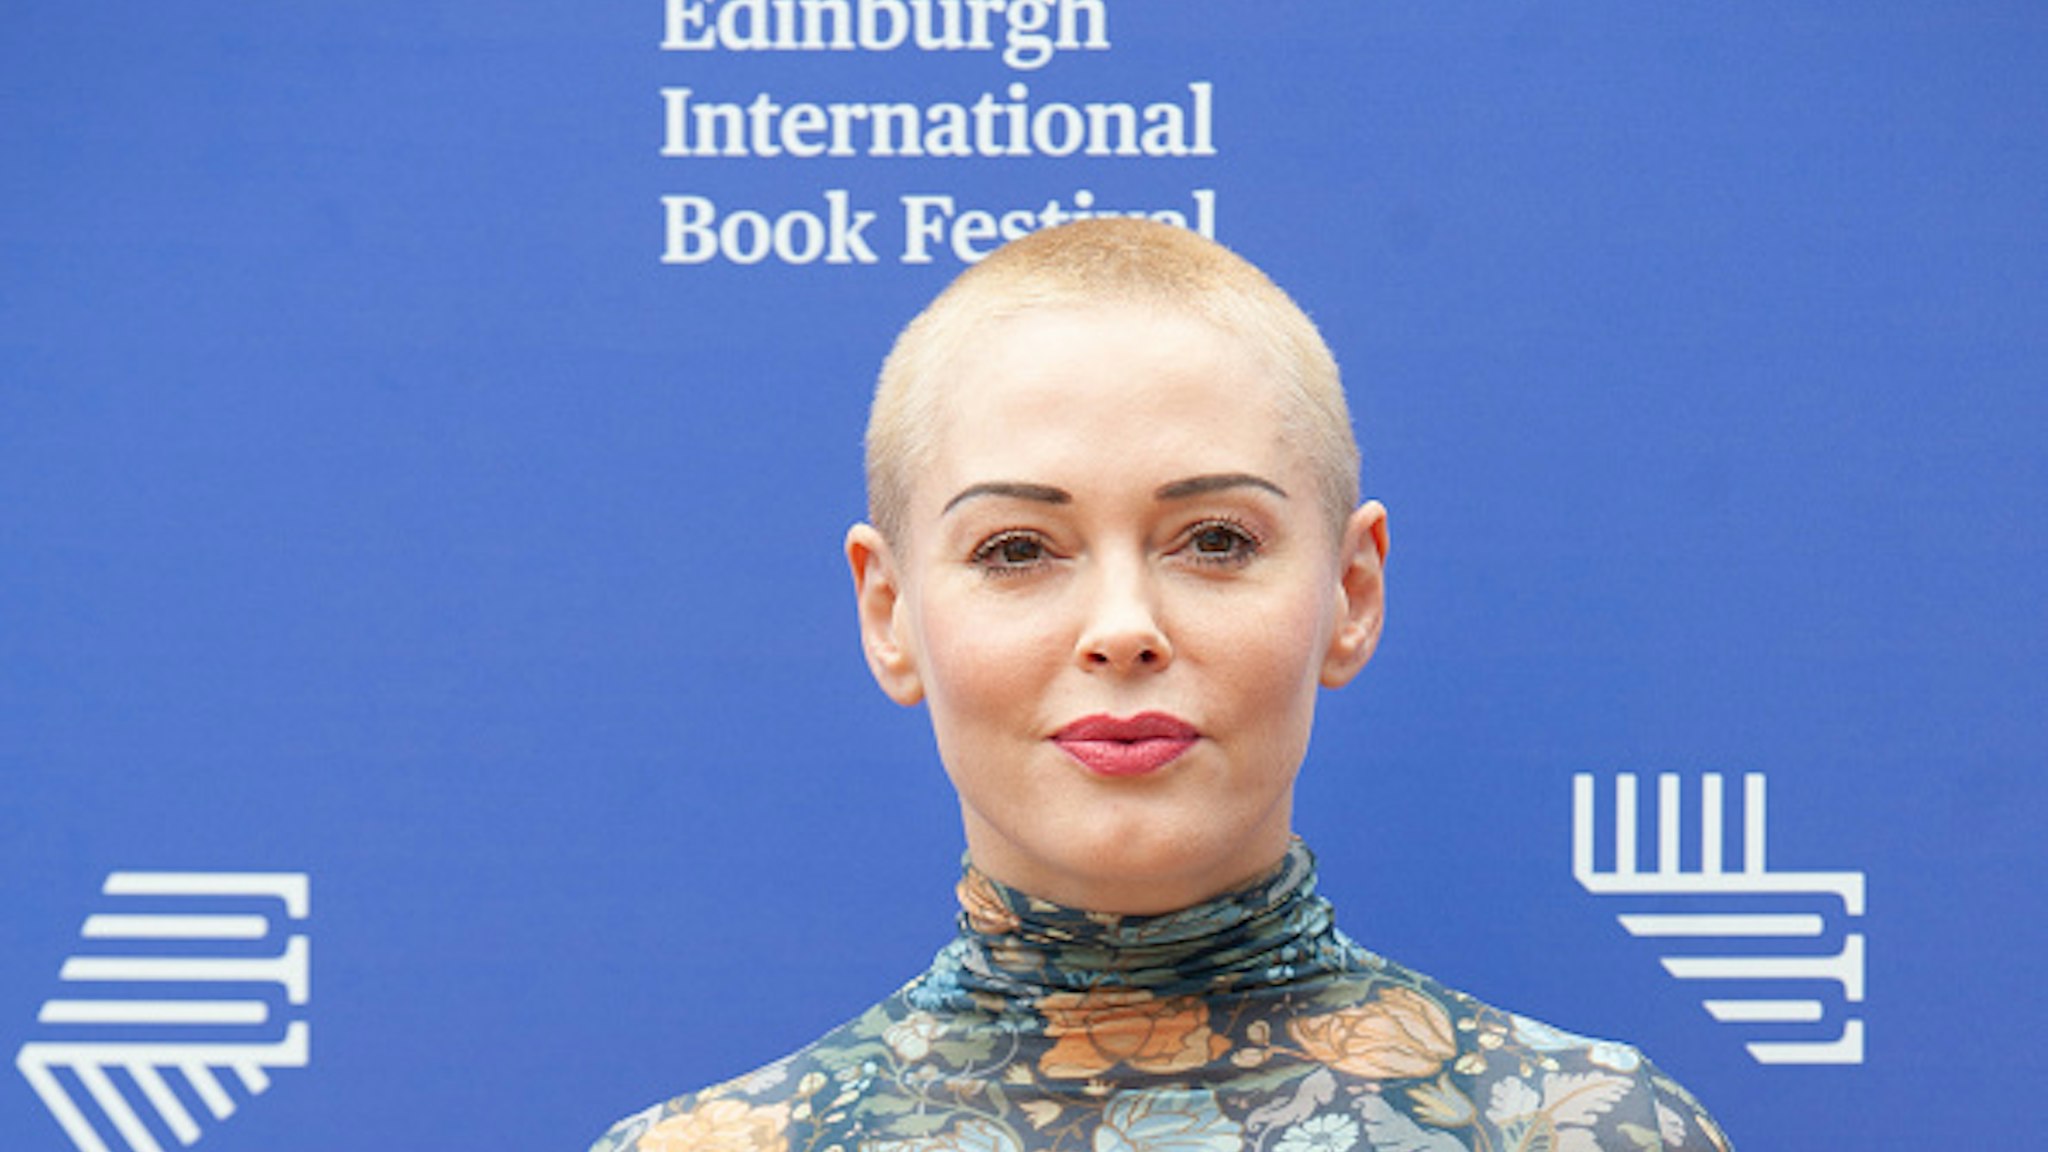 EDINBURGH, SCOTLAND - AUGUST 13: American activist, former actress, author, model and singer Rose McGowan attends a photocall during the annual Edinburgh International Book Festival at Charlotte Square Gardens on August 13, 2018 in Edinburgh, Scotland.